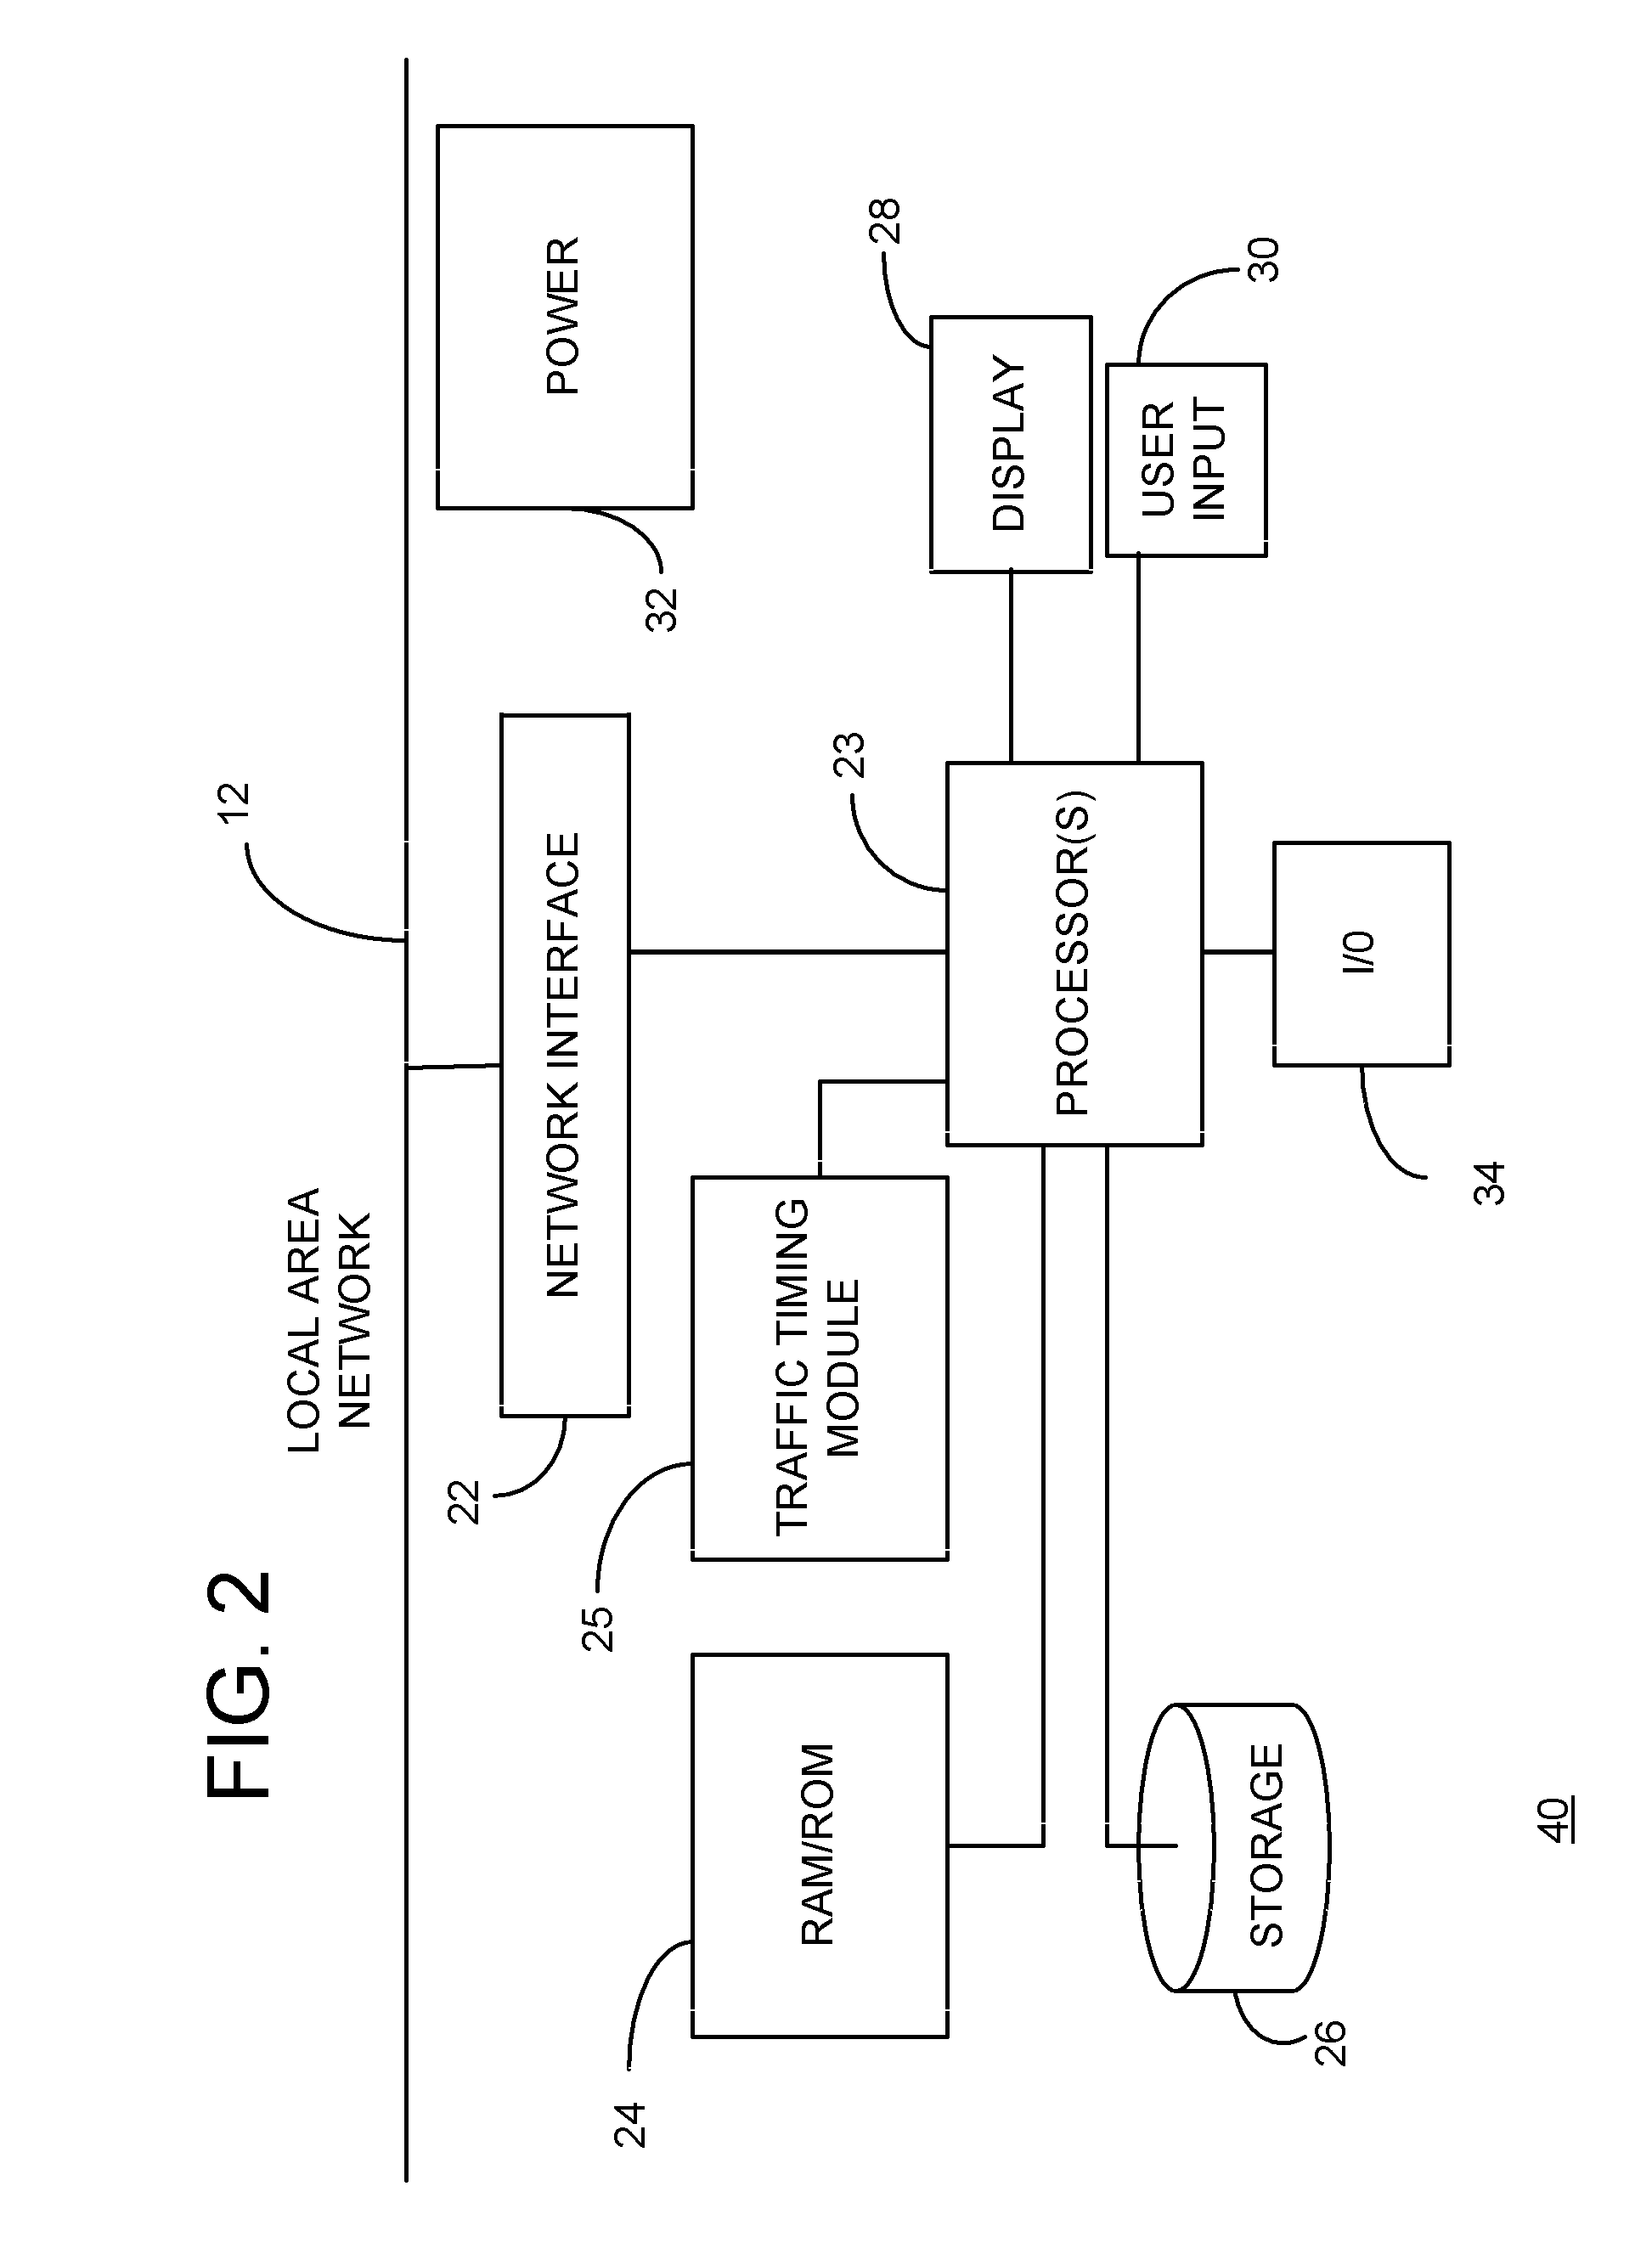 Method and apparatus of end-user response time determination for both TCP and non-TCP protocols